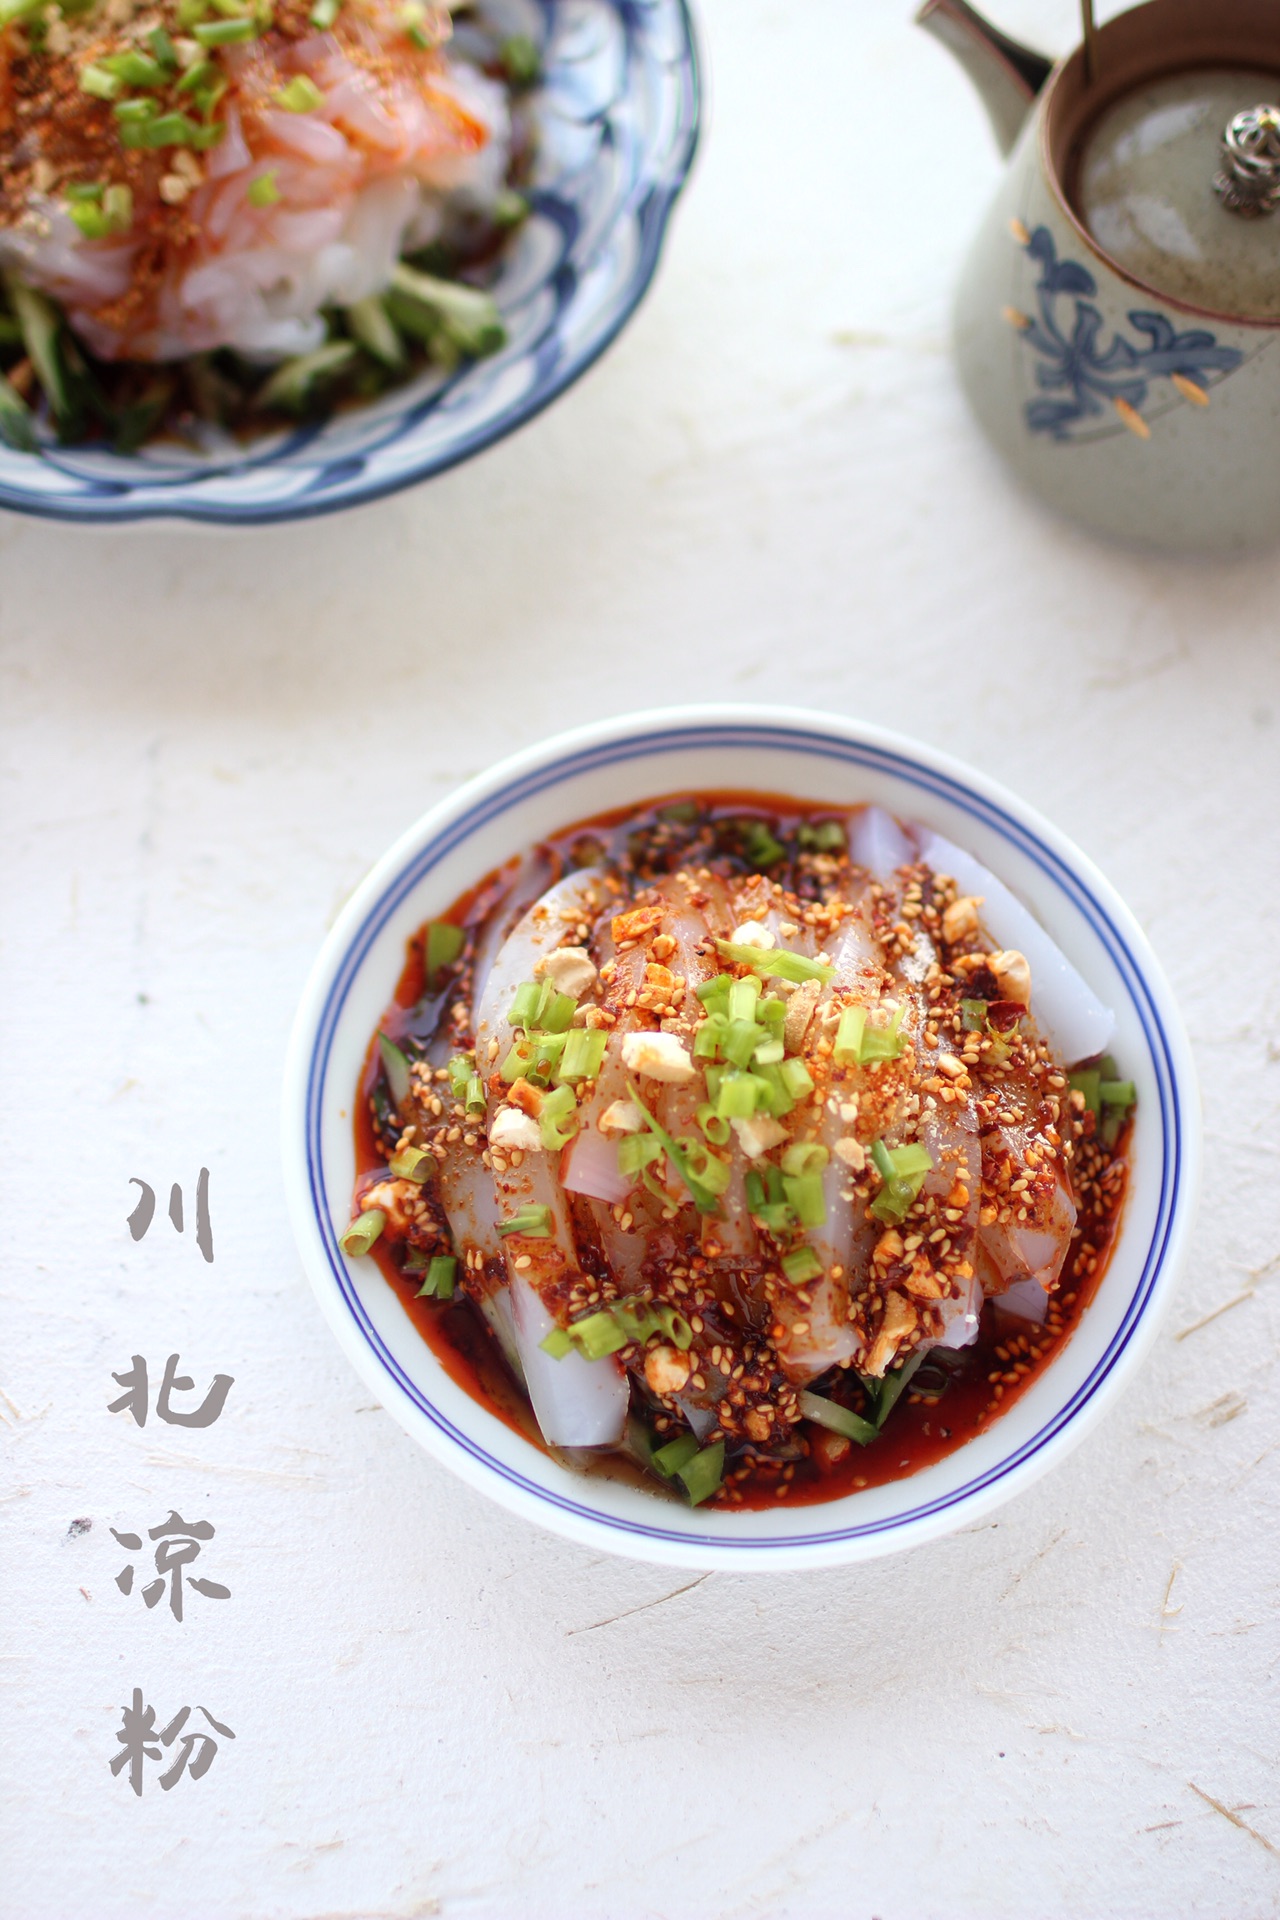 A must-have dish of Sichuan Restaurant - North Sichuan Cold Noodles